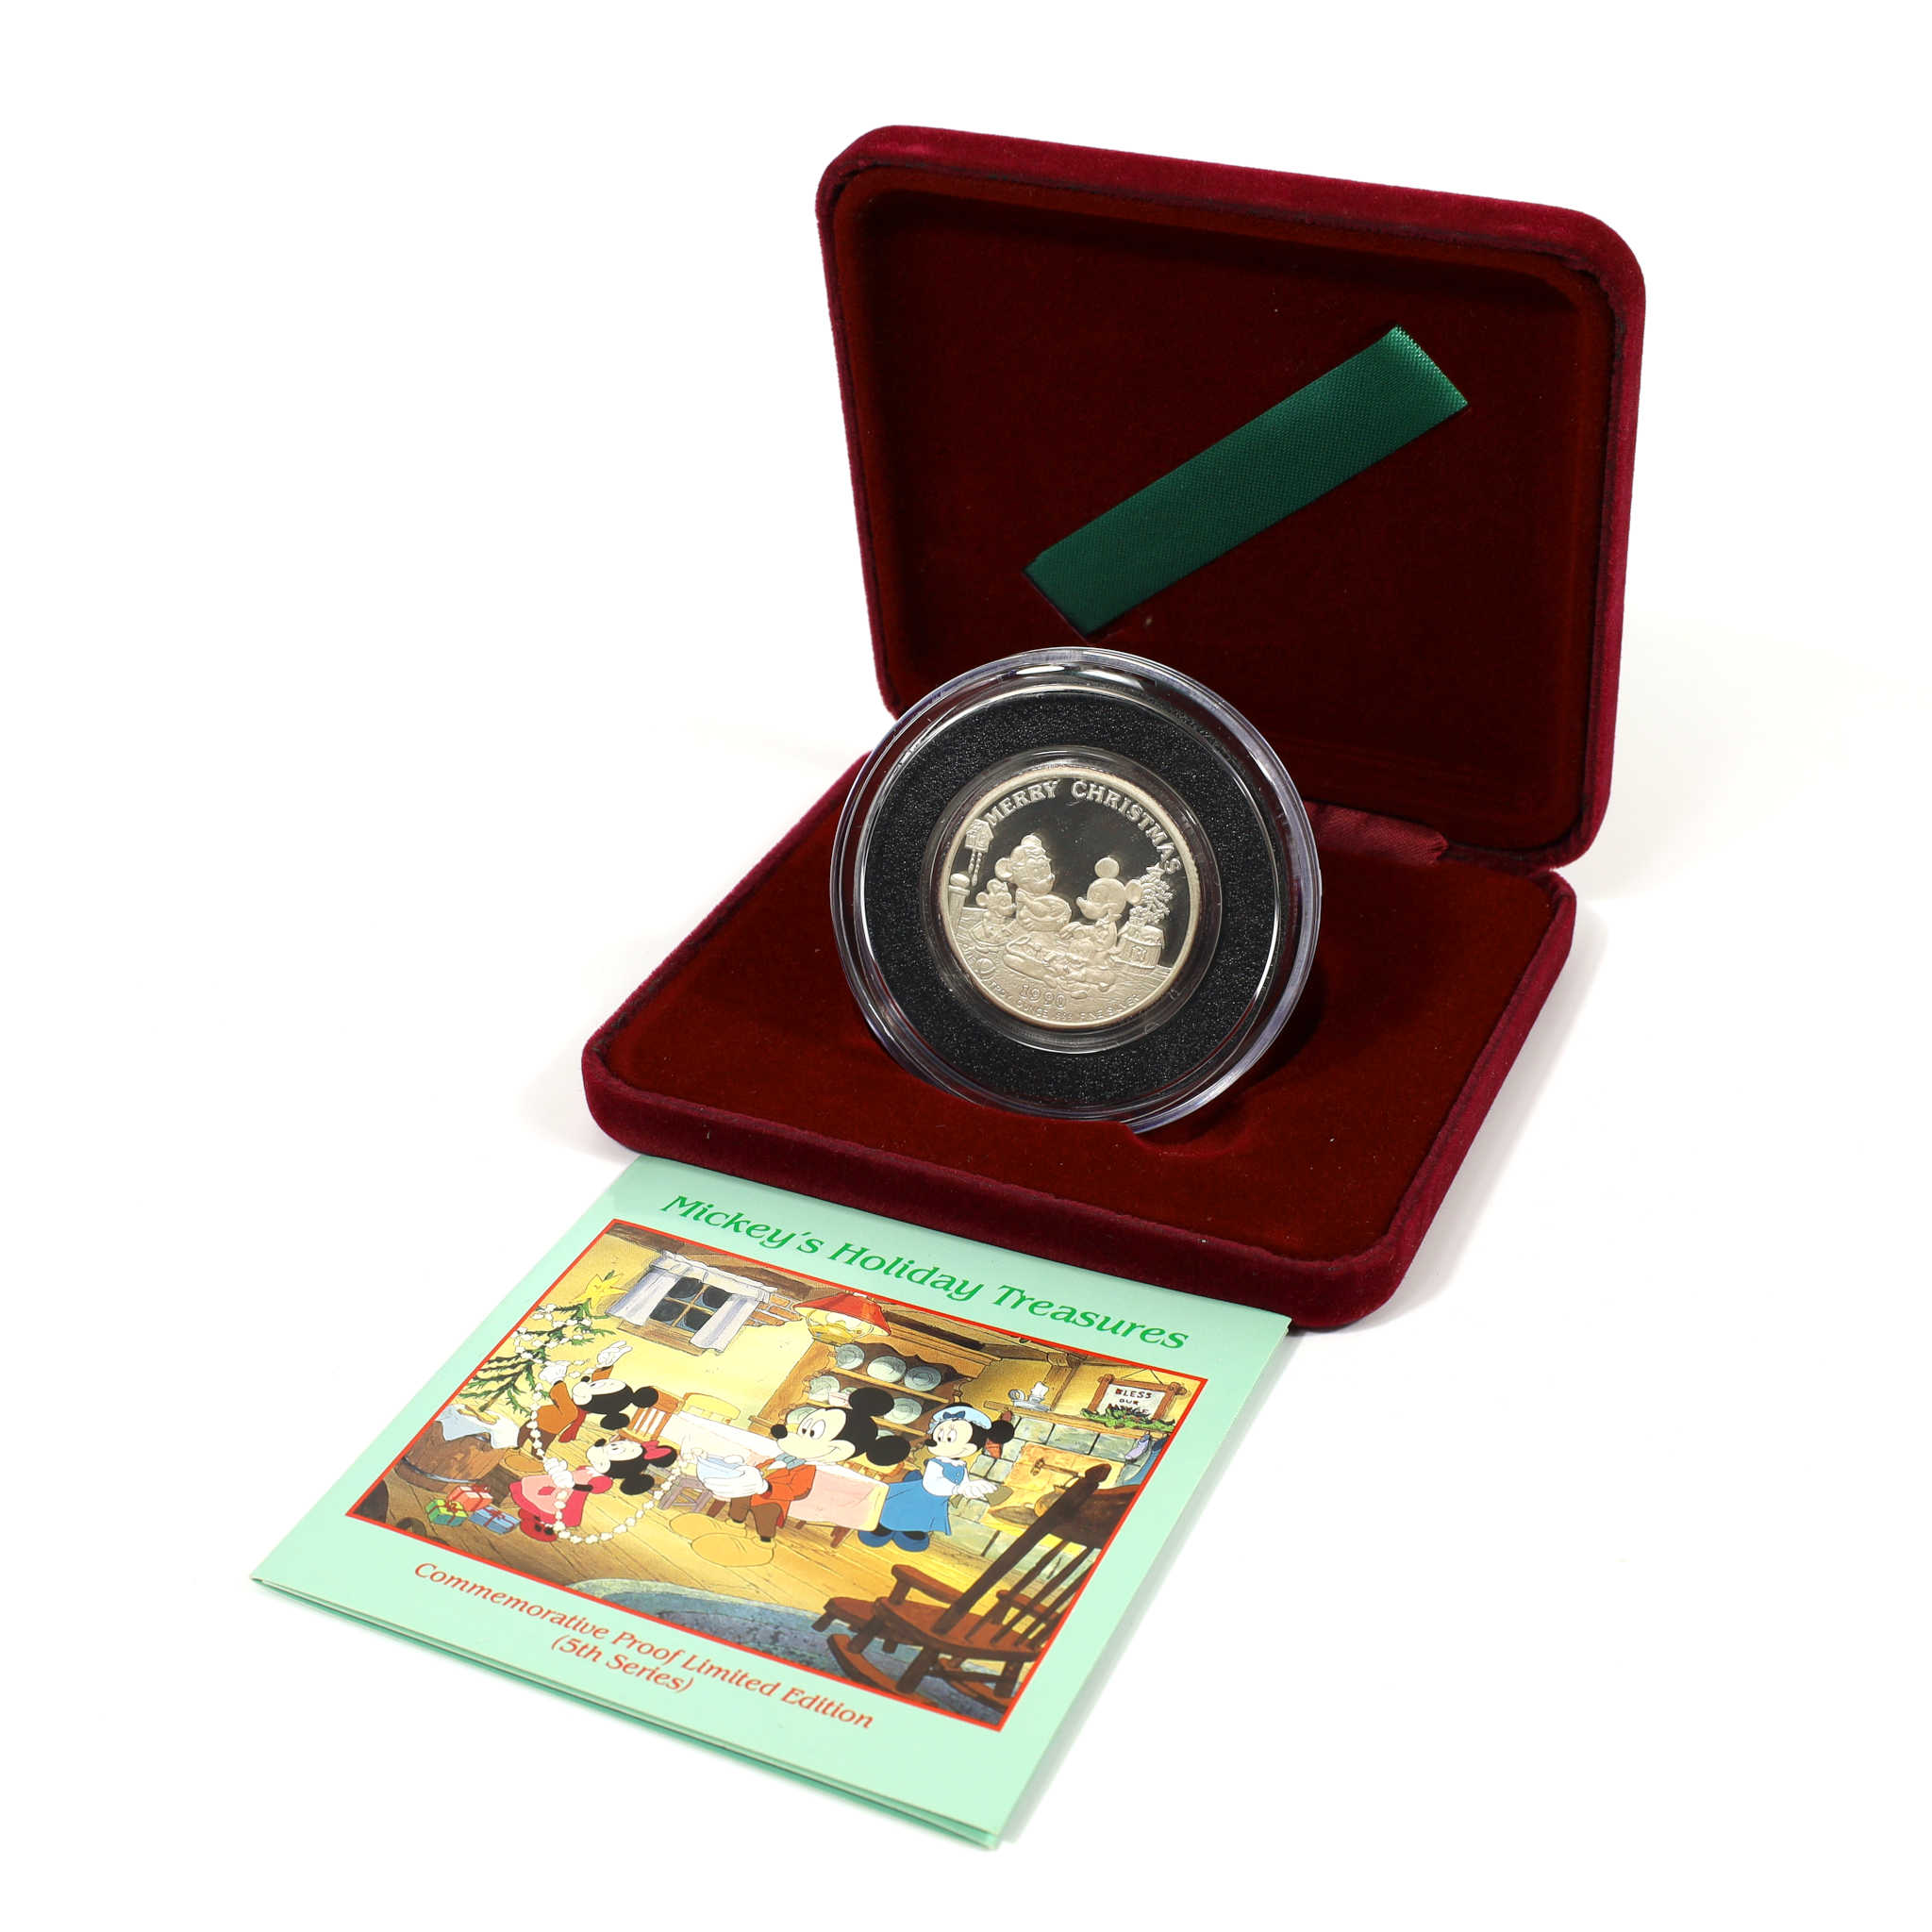 1990 Mickeys Holiday Treasures Limited Edition Proof Coin SKU:CPC3620